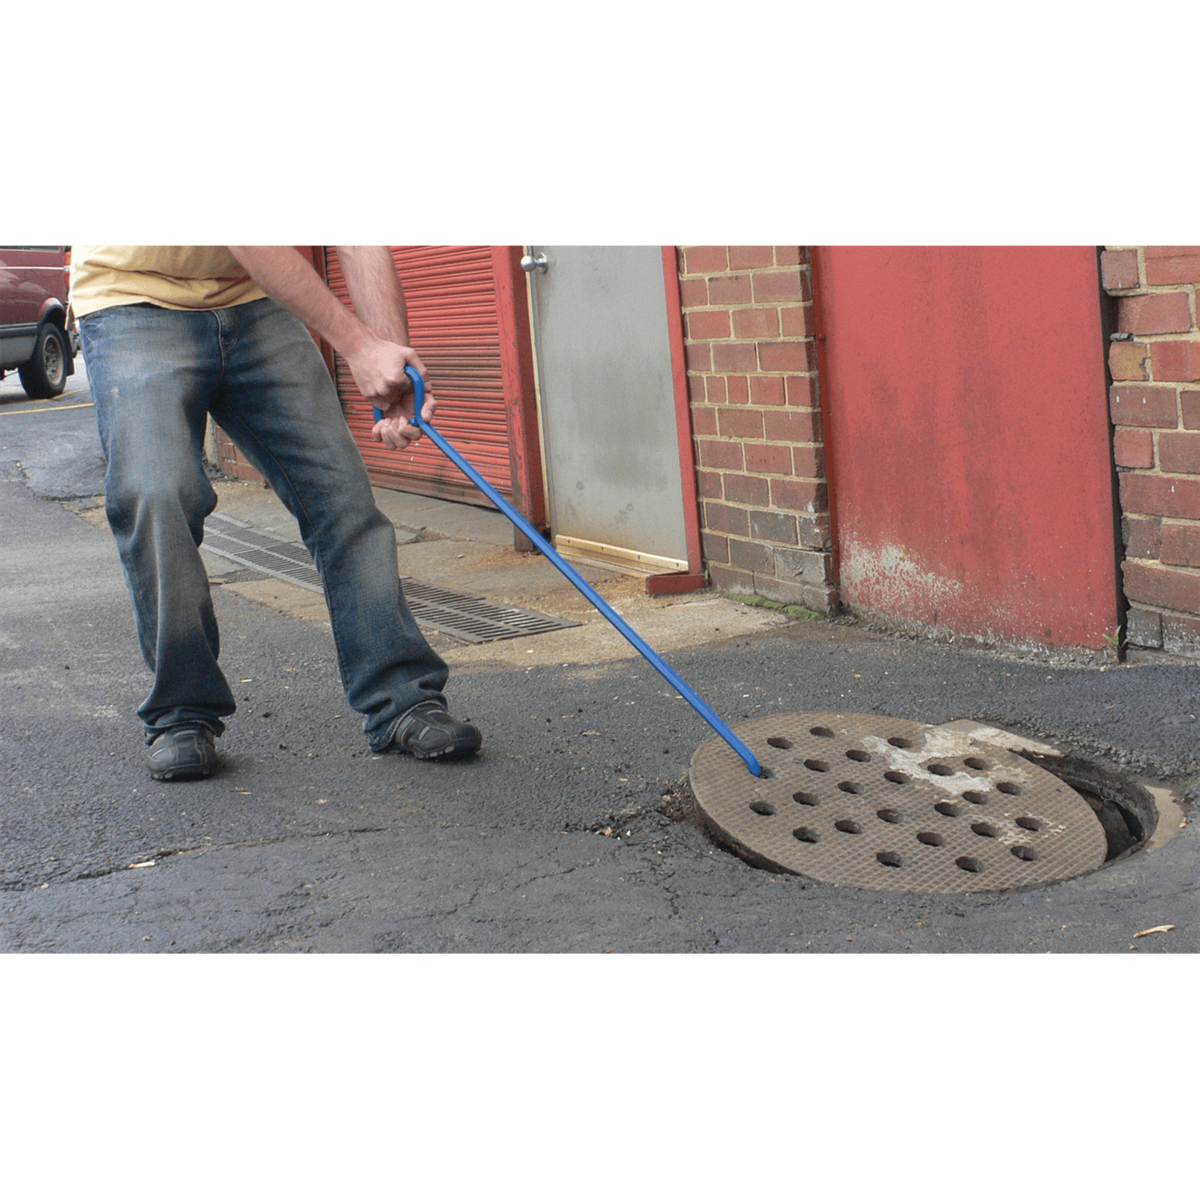 Trumbull In-Line Handle Manhole Cover Hook, 36" Long